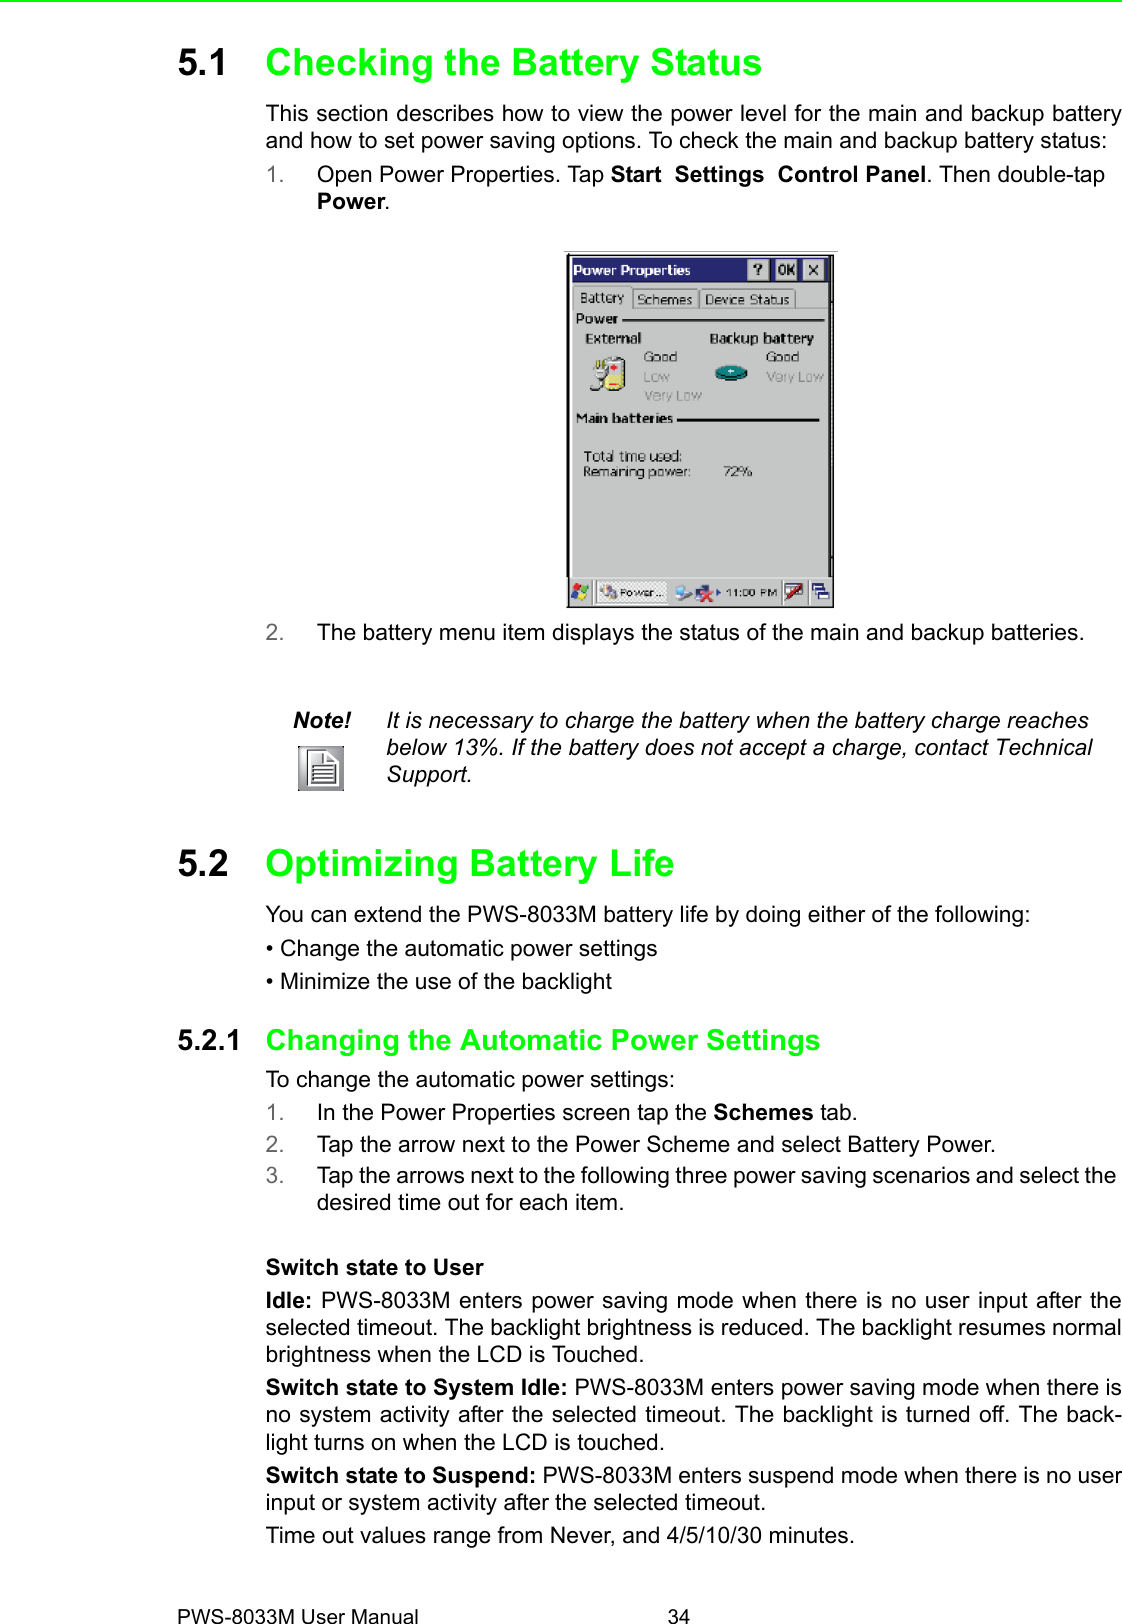 PWS-8033M User Manual 345.1 Checking the Battery StatusThis section describes how to view the power level for the main and backup batteryand how to set power saving options. To check the main and backup battery status:1. Open Power Properties. Tap Start  Settings  Control Panel. Then double-tap Power. 2. The battery menu item displays the status of the main and backup batteries.5.2 Optimizing Battery LifeYou can extend the PWS-8033M battery life by doing either of the following:• Change the automatic power settings• Minimize the use of the backlight5.2.1 Changing the Automatic Power SettingsTo change the automatic power settings:1. In the Power Properties screen tap the Schemes tab.2. Tap the arrow next to the Power Scheme and select Battery Power.3. Tap the arrows next to the following three power saving scenarios and select the desired time out for each item.Switch state to UserIdle: PWS-8033M enters power saving mode when there is no user input after theselected timeout. The backlight brightness is reduced. The backlight resumes normalbrightness when the LCD is Touched.Switch state to System Idle: PWS-8033M enters power saving mode when there isno system activity after the selected timeout. The backlight is turned off. The back-light turns on when the LCD is touched.Switch state to Suspend: PWS-8033M enters suspend mode when there is no userinput or system activity after the selected timeout.Time out values range from Never, and 4/5/10/30 minutes.Note! It is necessary to charge the battery when the battery charge reaches below 13%. If the battery does not accept a charge, contact Technical Support.